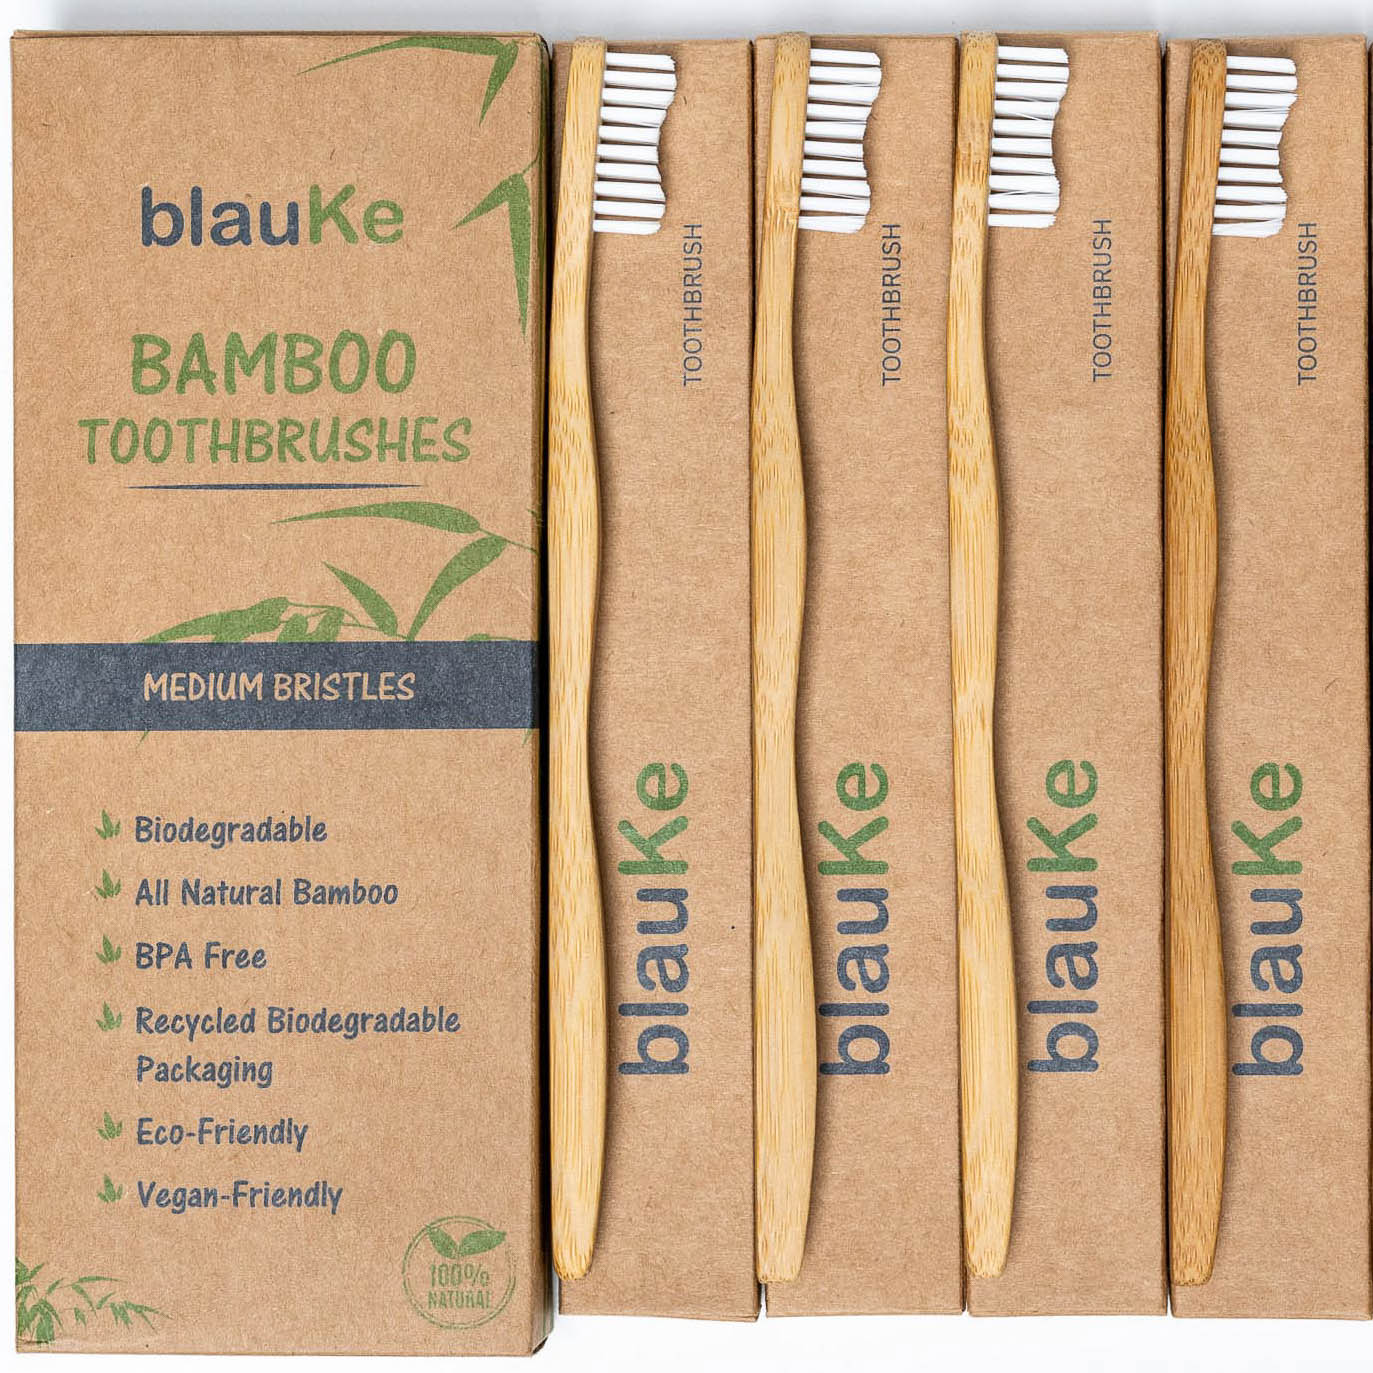 Bamboo Toothbrush Set 4-Pack - Bamboo Toothbrushes with Medium Bristles for Adults - Eco-Friendly, Biodegradable, Natural Wooden Toothbrushes-4